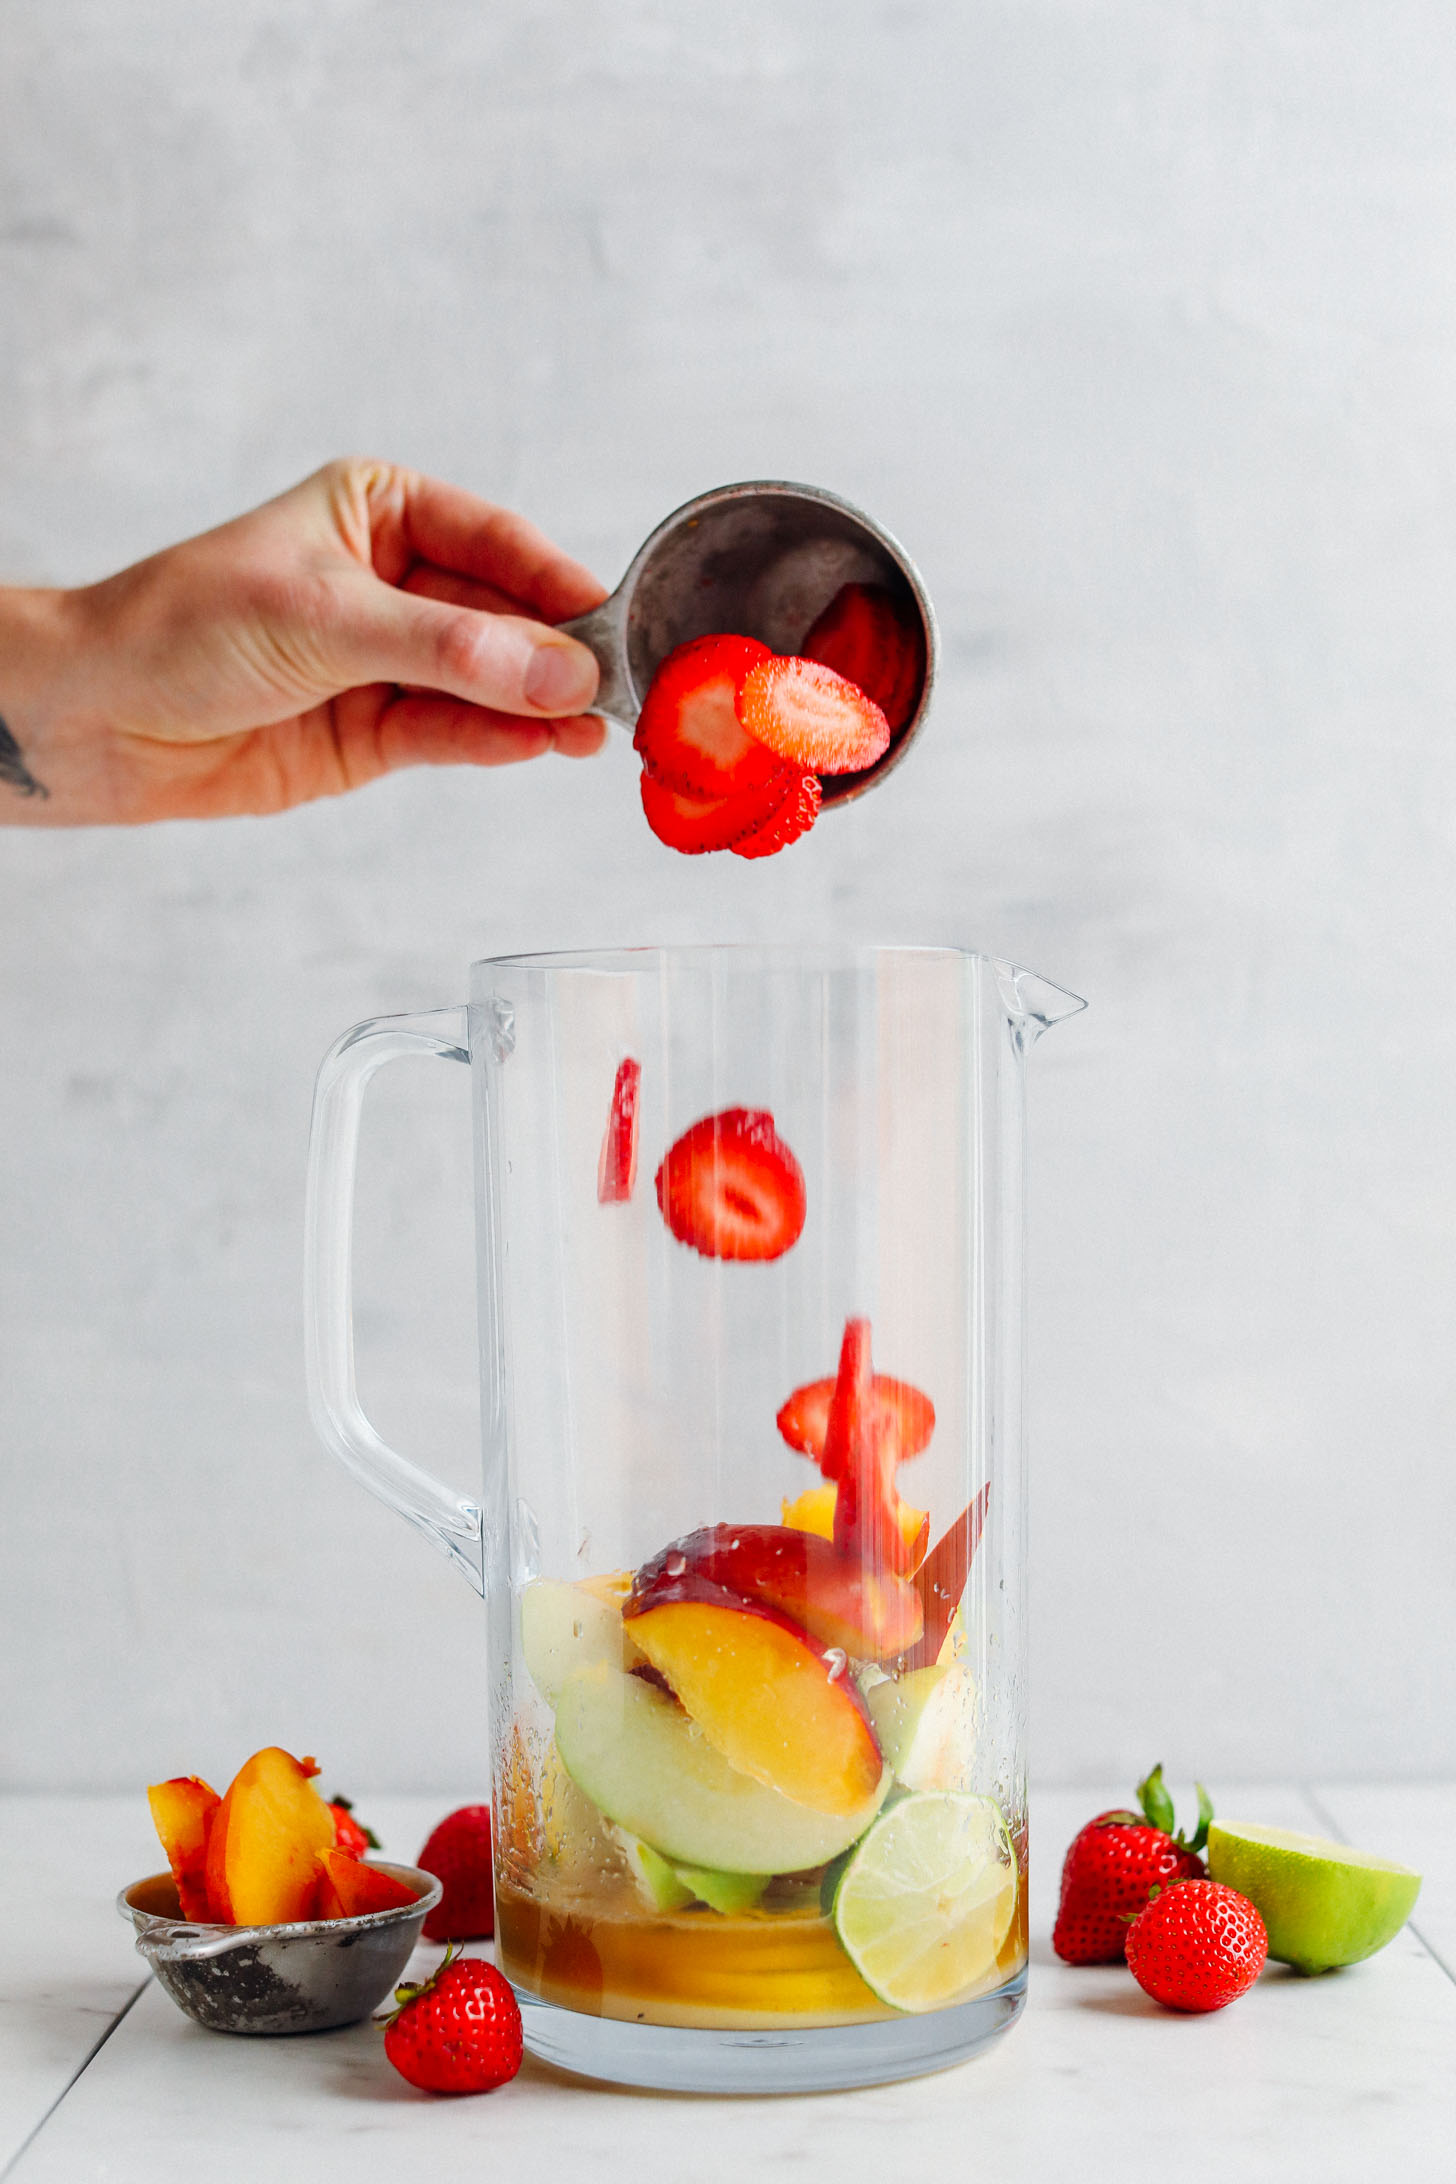 Tossing strawberries into a pitcher with other fruit and apple brandy for an Easy Traditional White Sangria